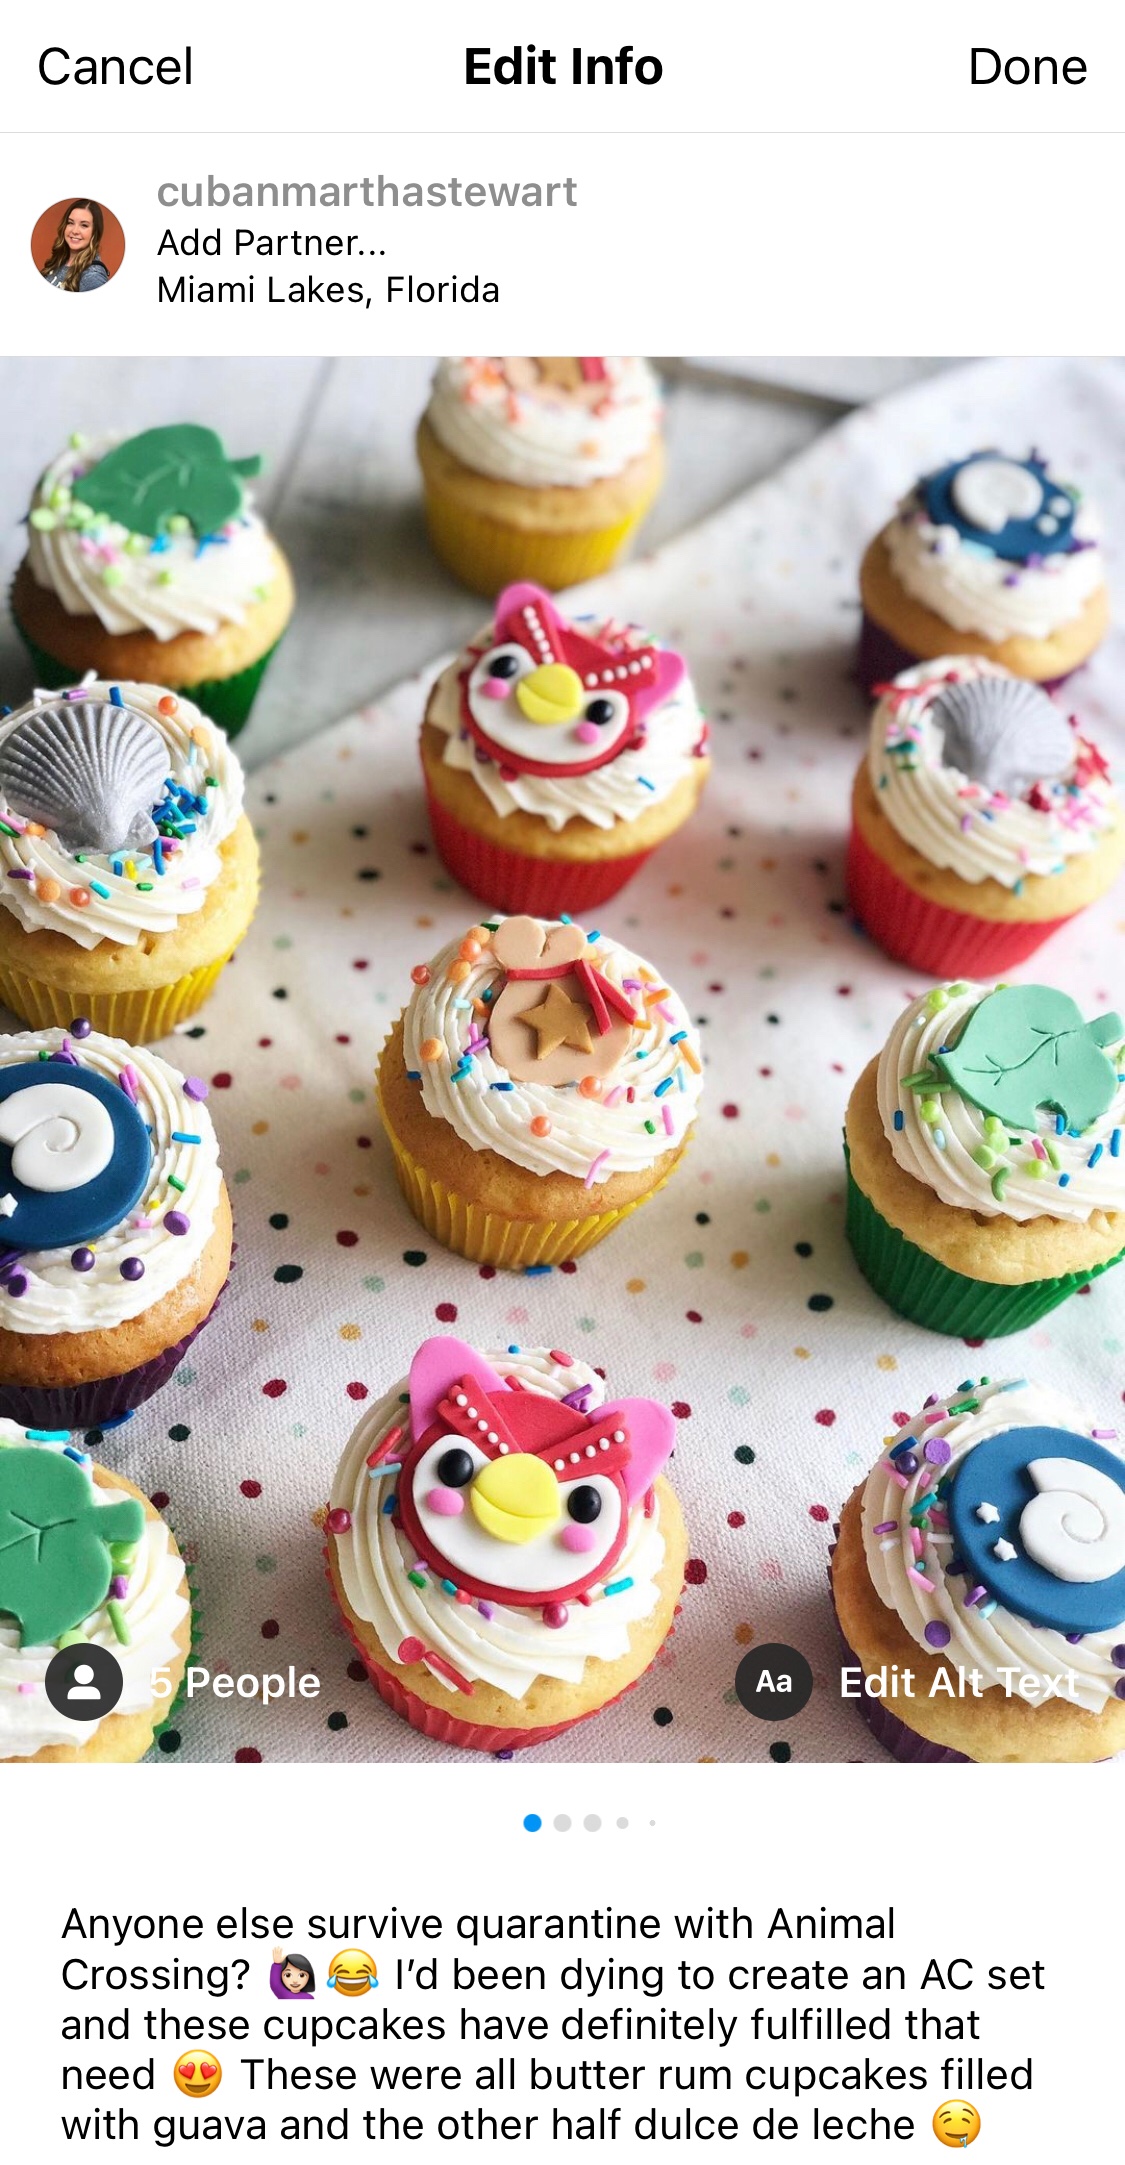 Screen shot of Instagram post including decorative cupcakes with sprinkles including a money bag, a red owl, a green leaf, a silver sea shell, and a blue fossil.